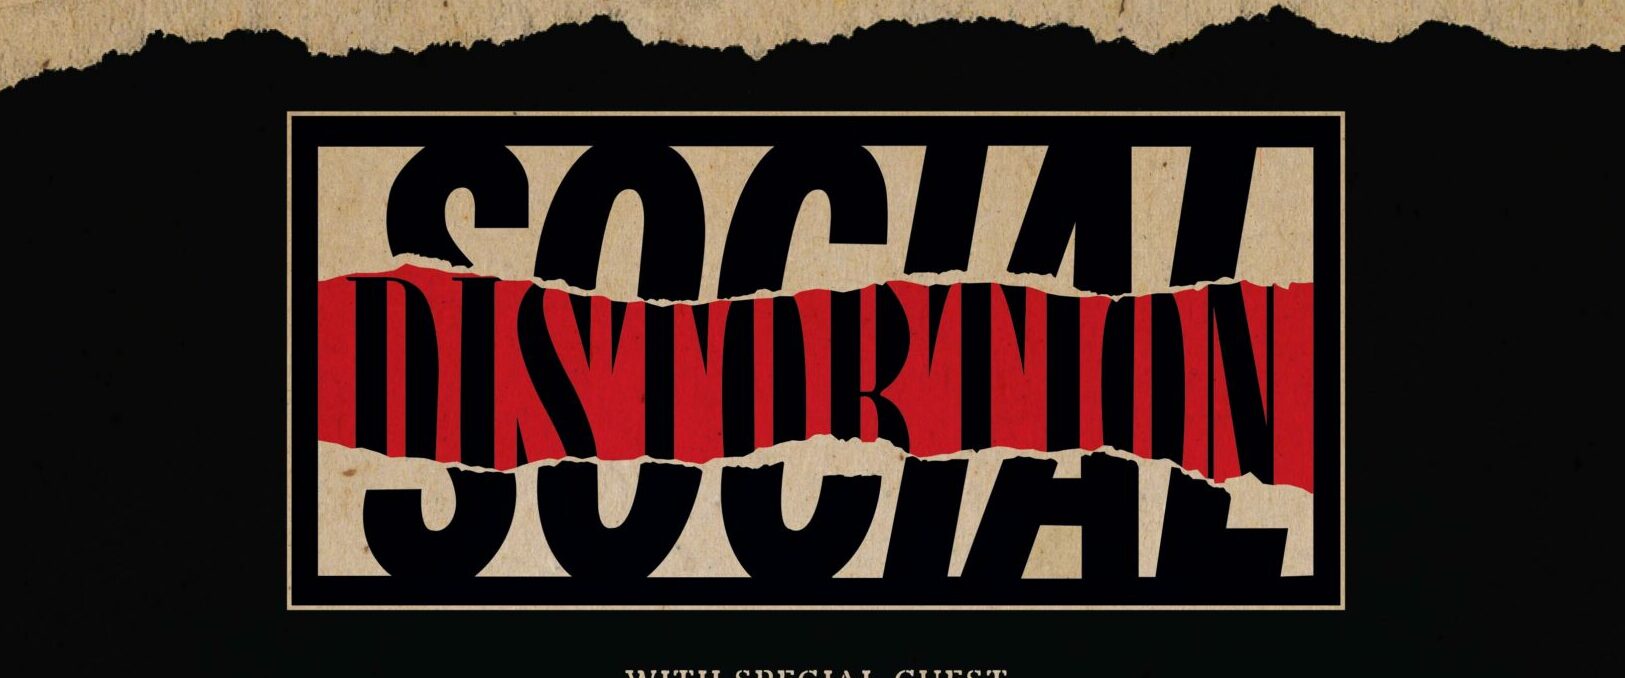 <h1 class="tribe-events-single-event-title">Social Distortion</h1>